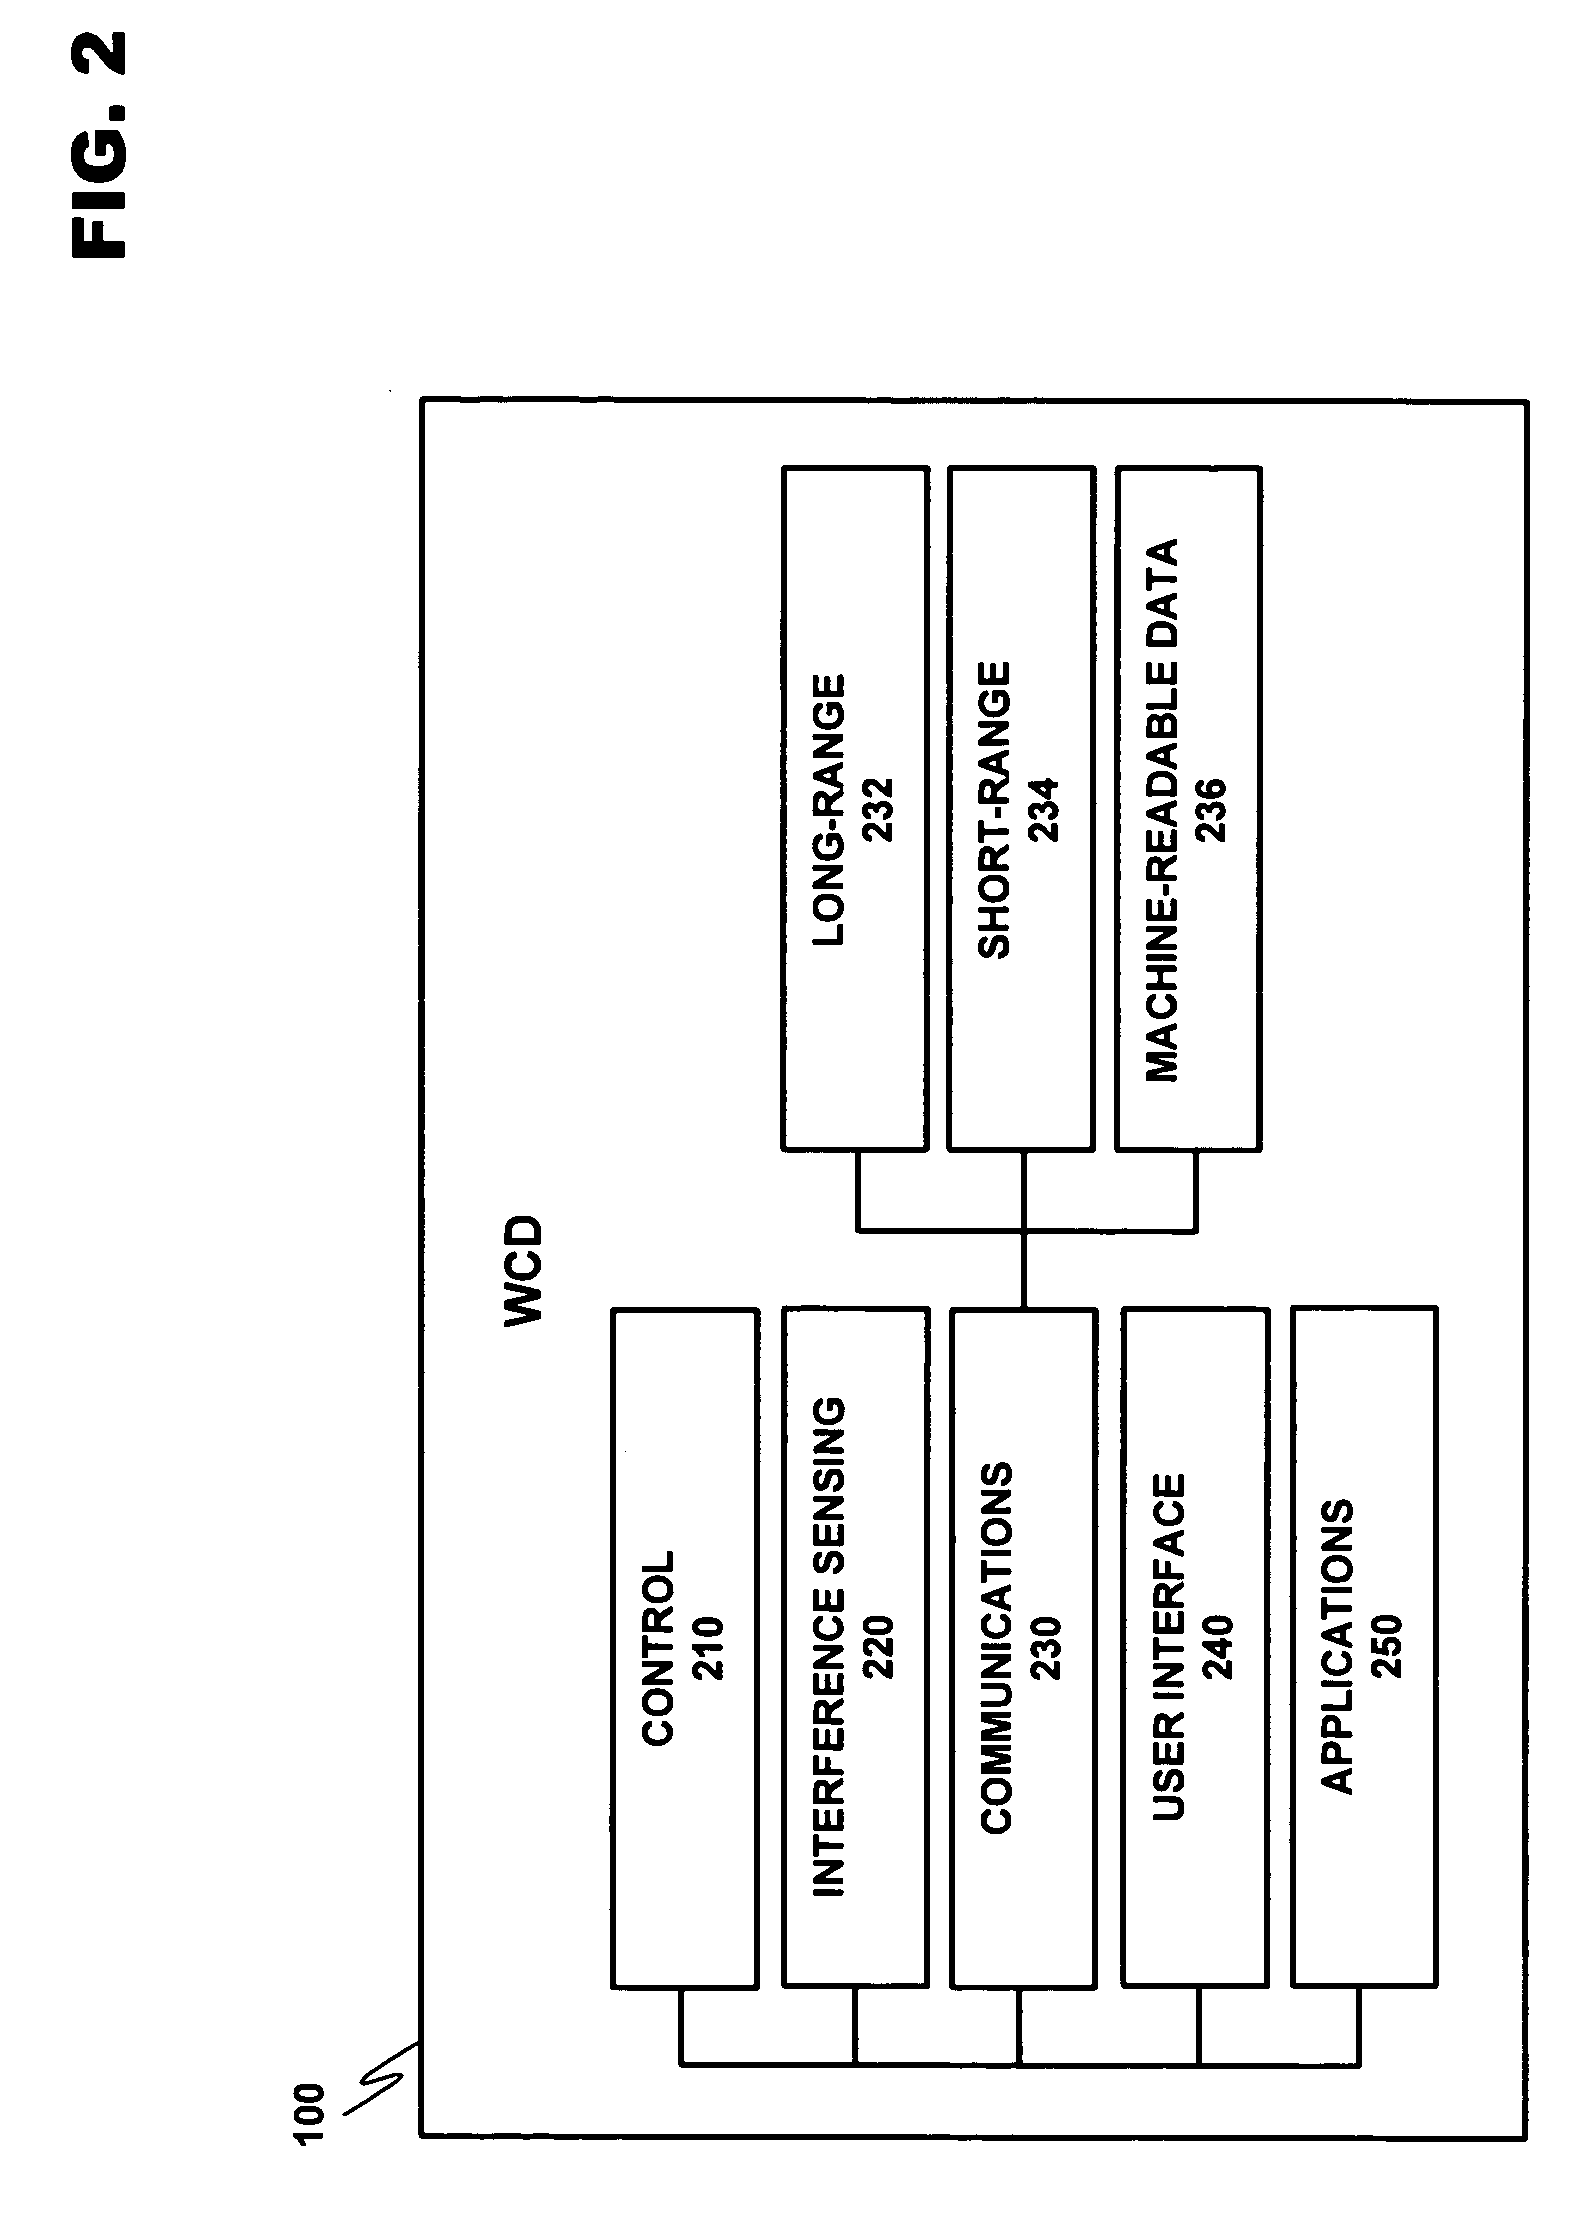 Conditional utilization of private short-range wireless networks for service provision and mobility